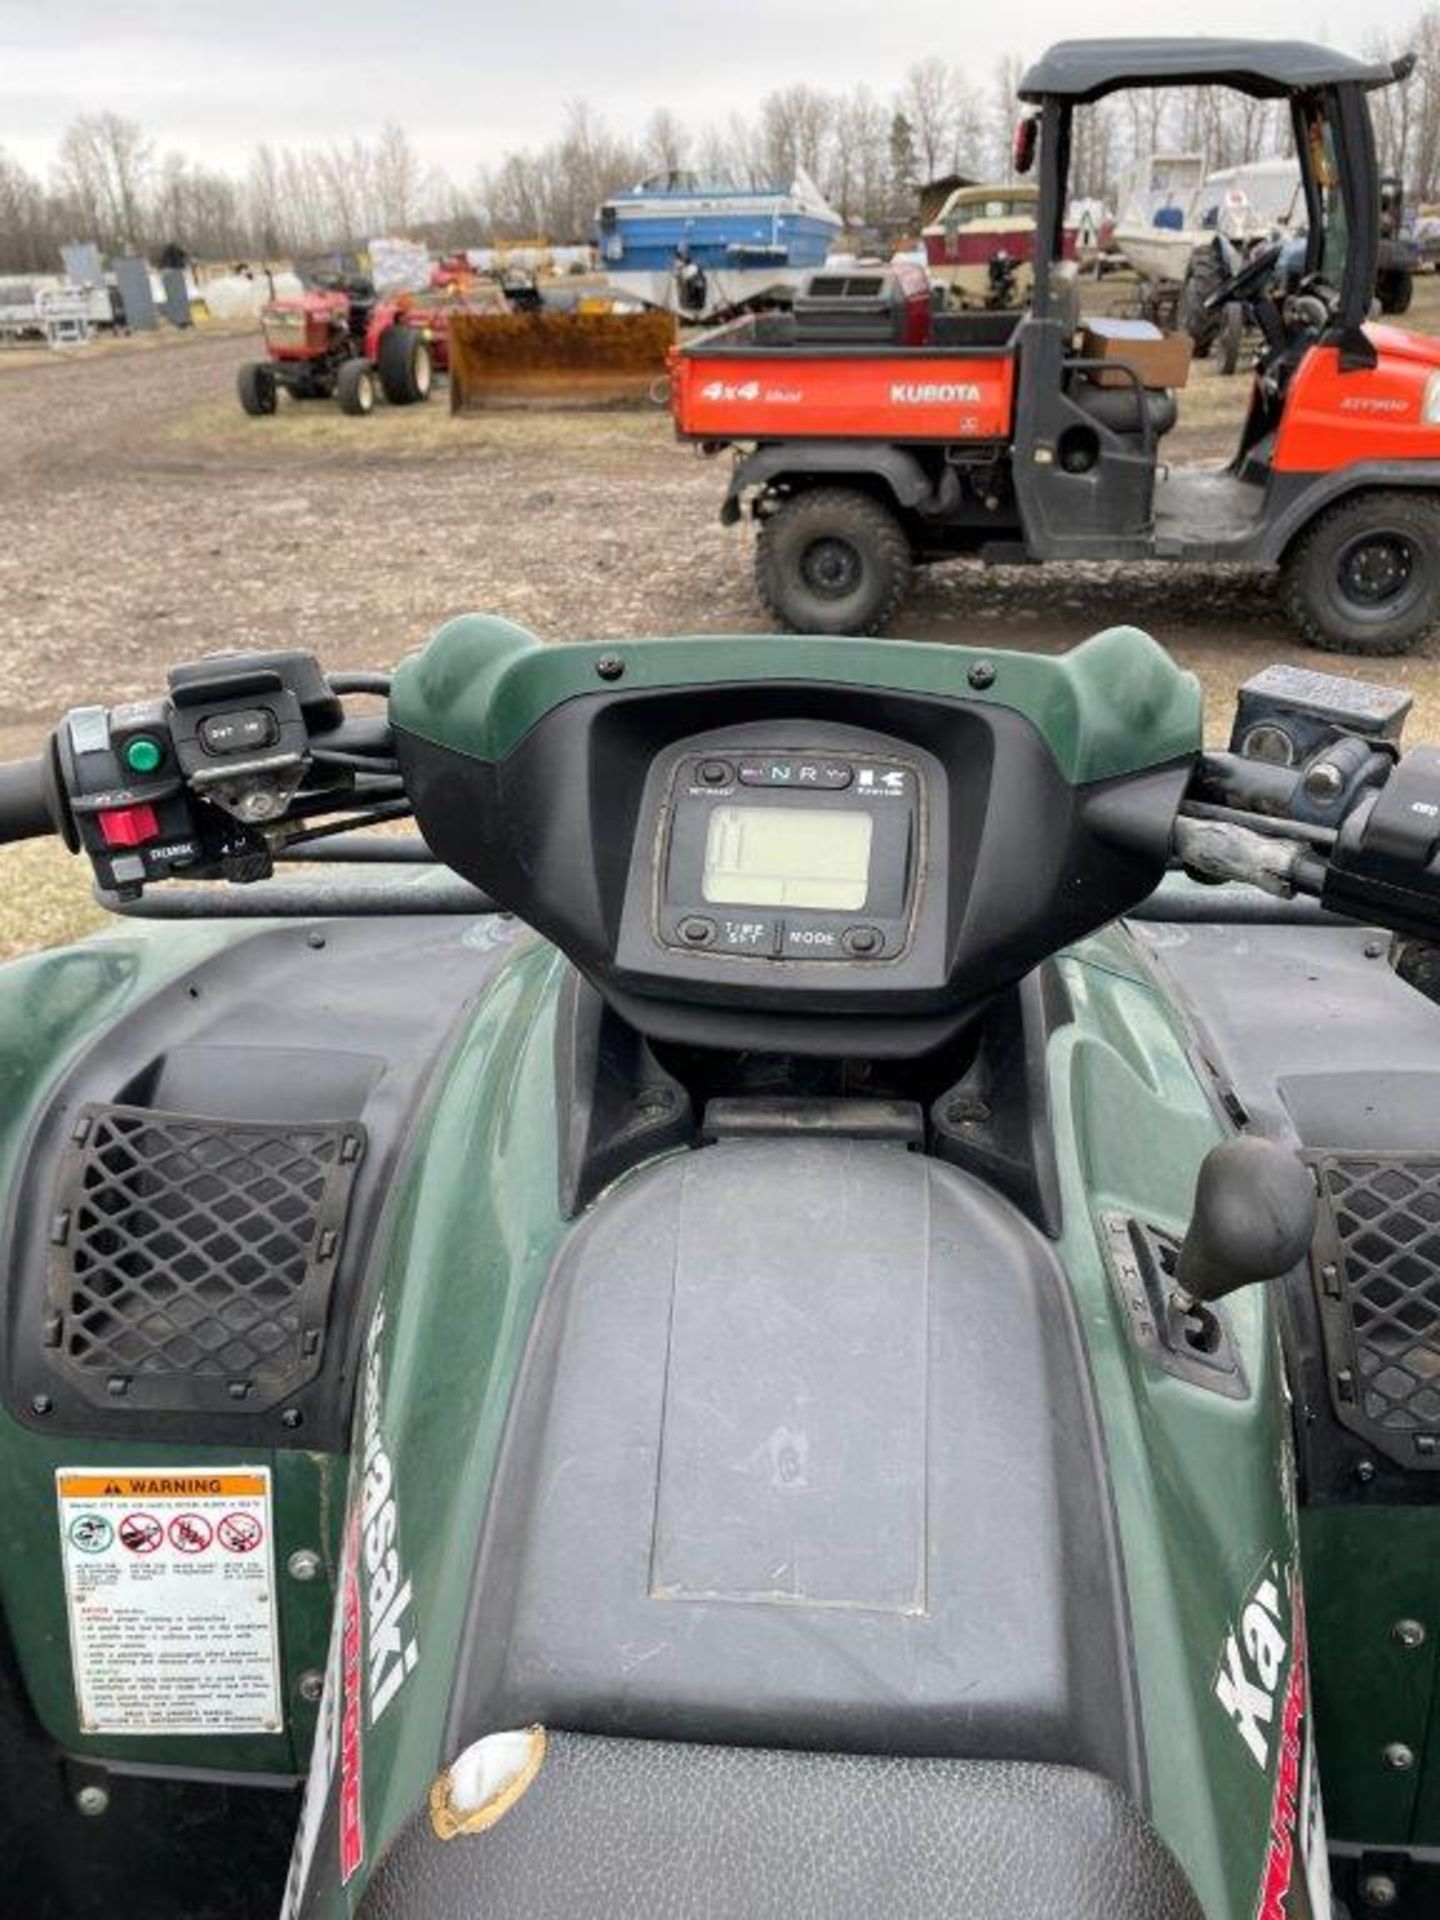 2007 KAWASAKI BRUTE FORCE 750 ATV 4X4 AUTO, RECENT CARB CLEAN, NEW BATTERY, 1762 KM'S SHOWING - Image 17 of 19